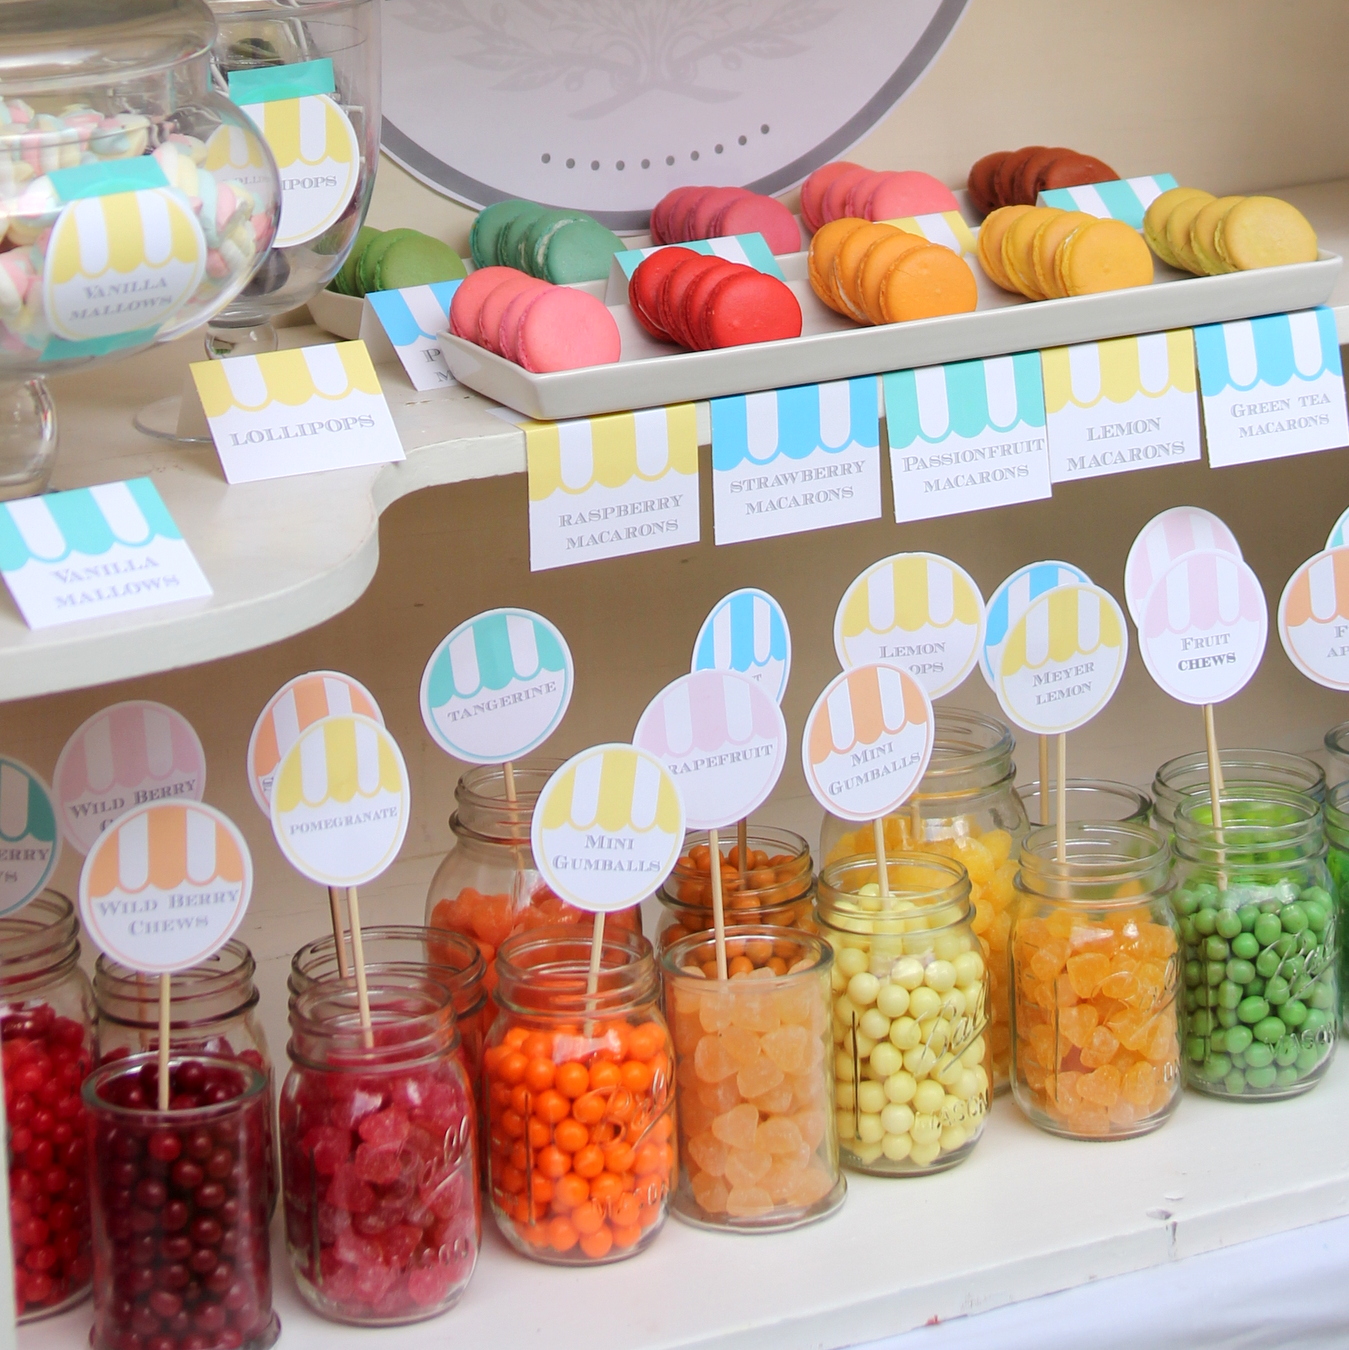 the very sweetest sweet shoppe (at a little girl's birthday party)